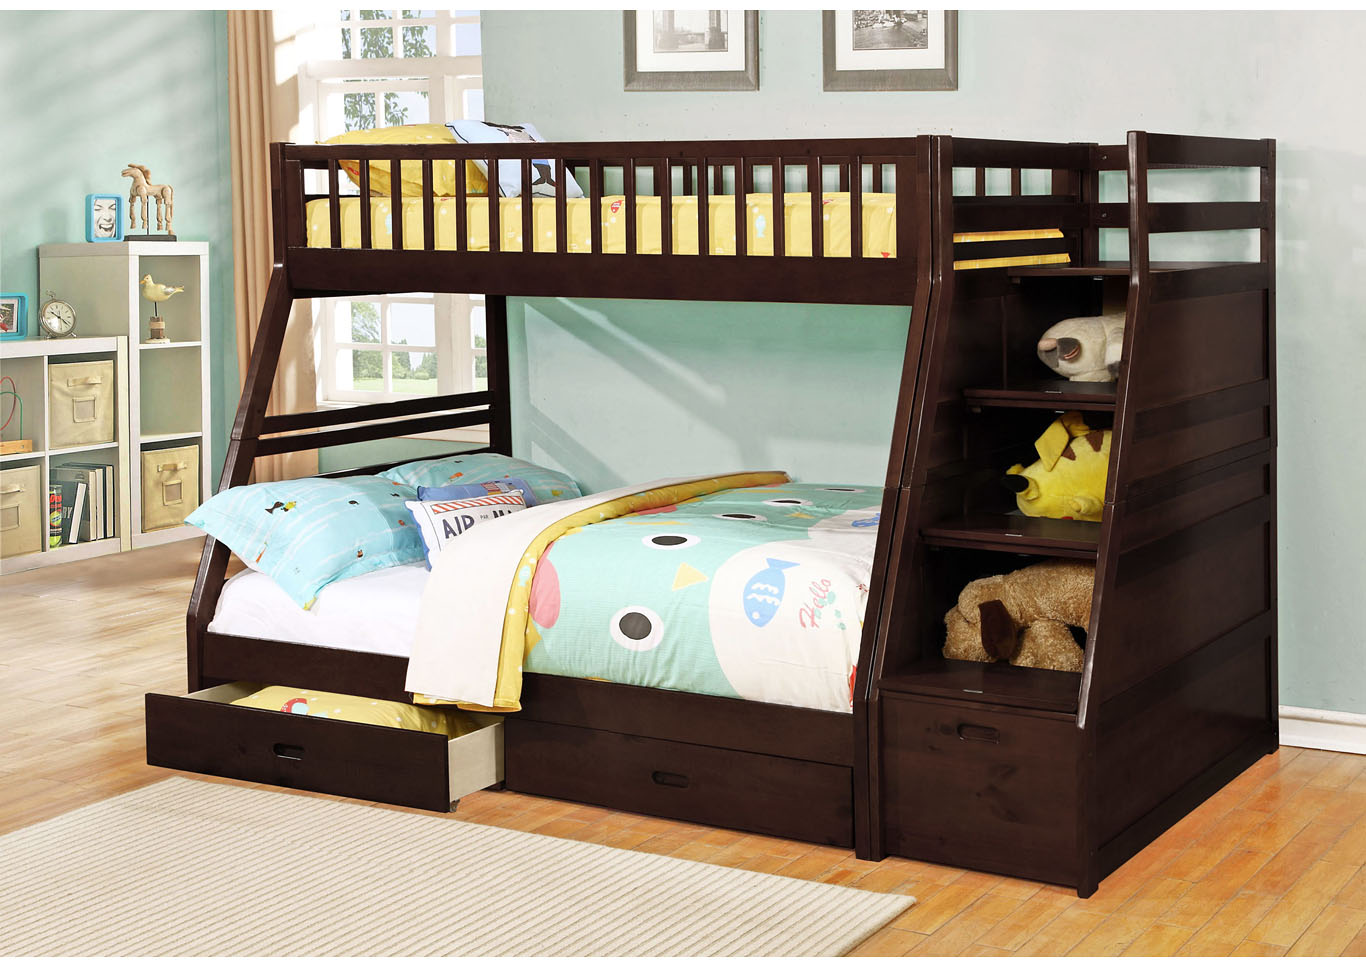 Dakota Twin/Full Angled Bunk Bed with Storage Staircase and Under Drawers - Espresso,Instore